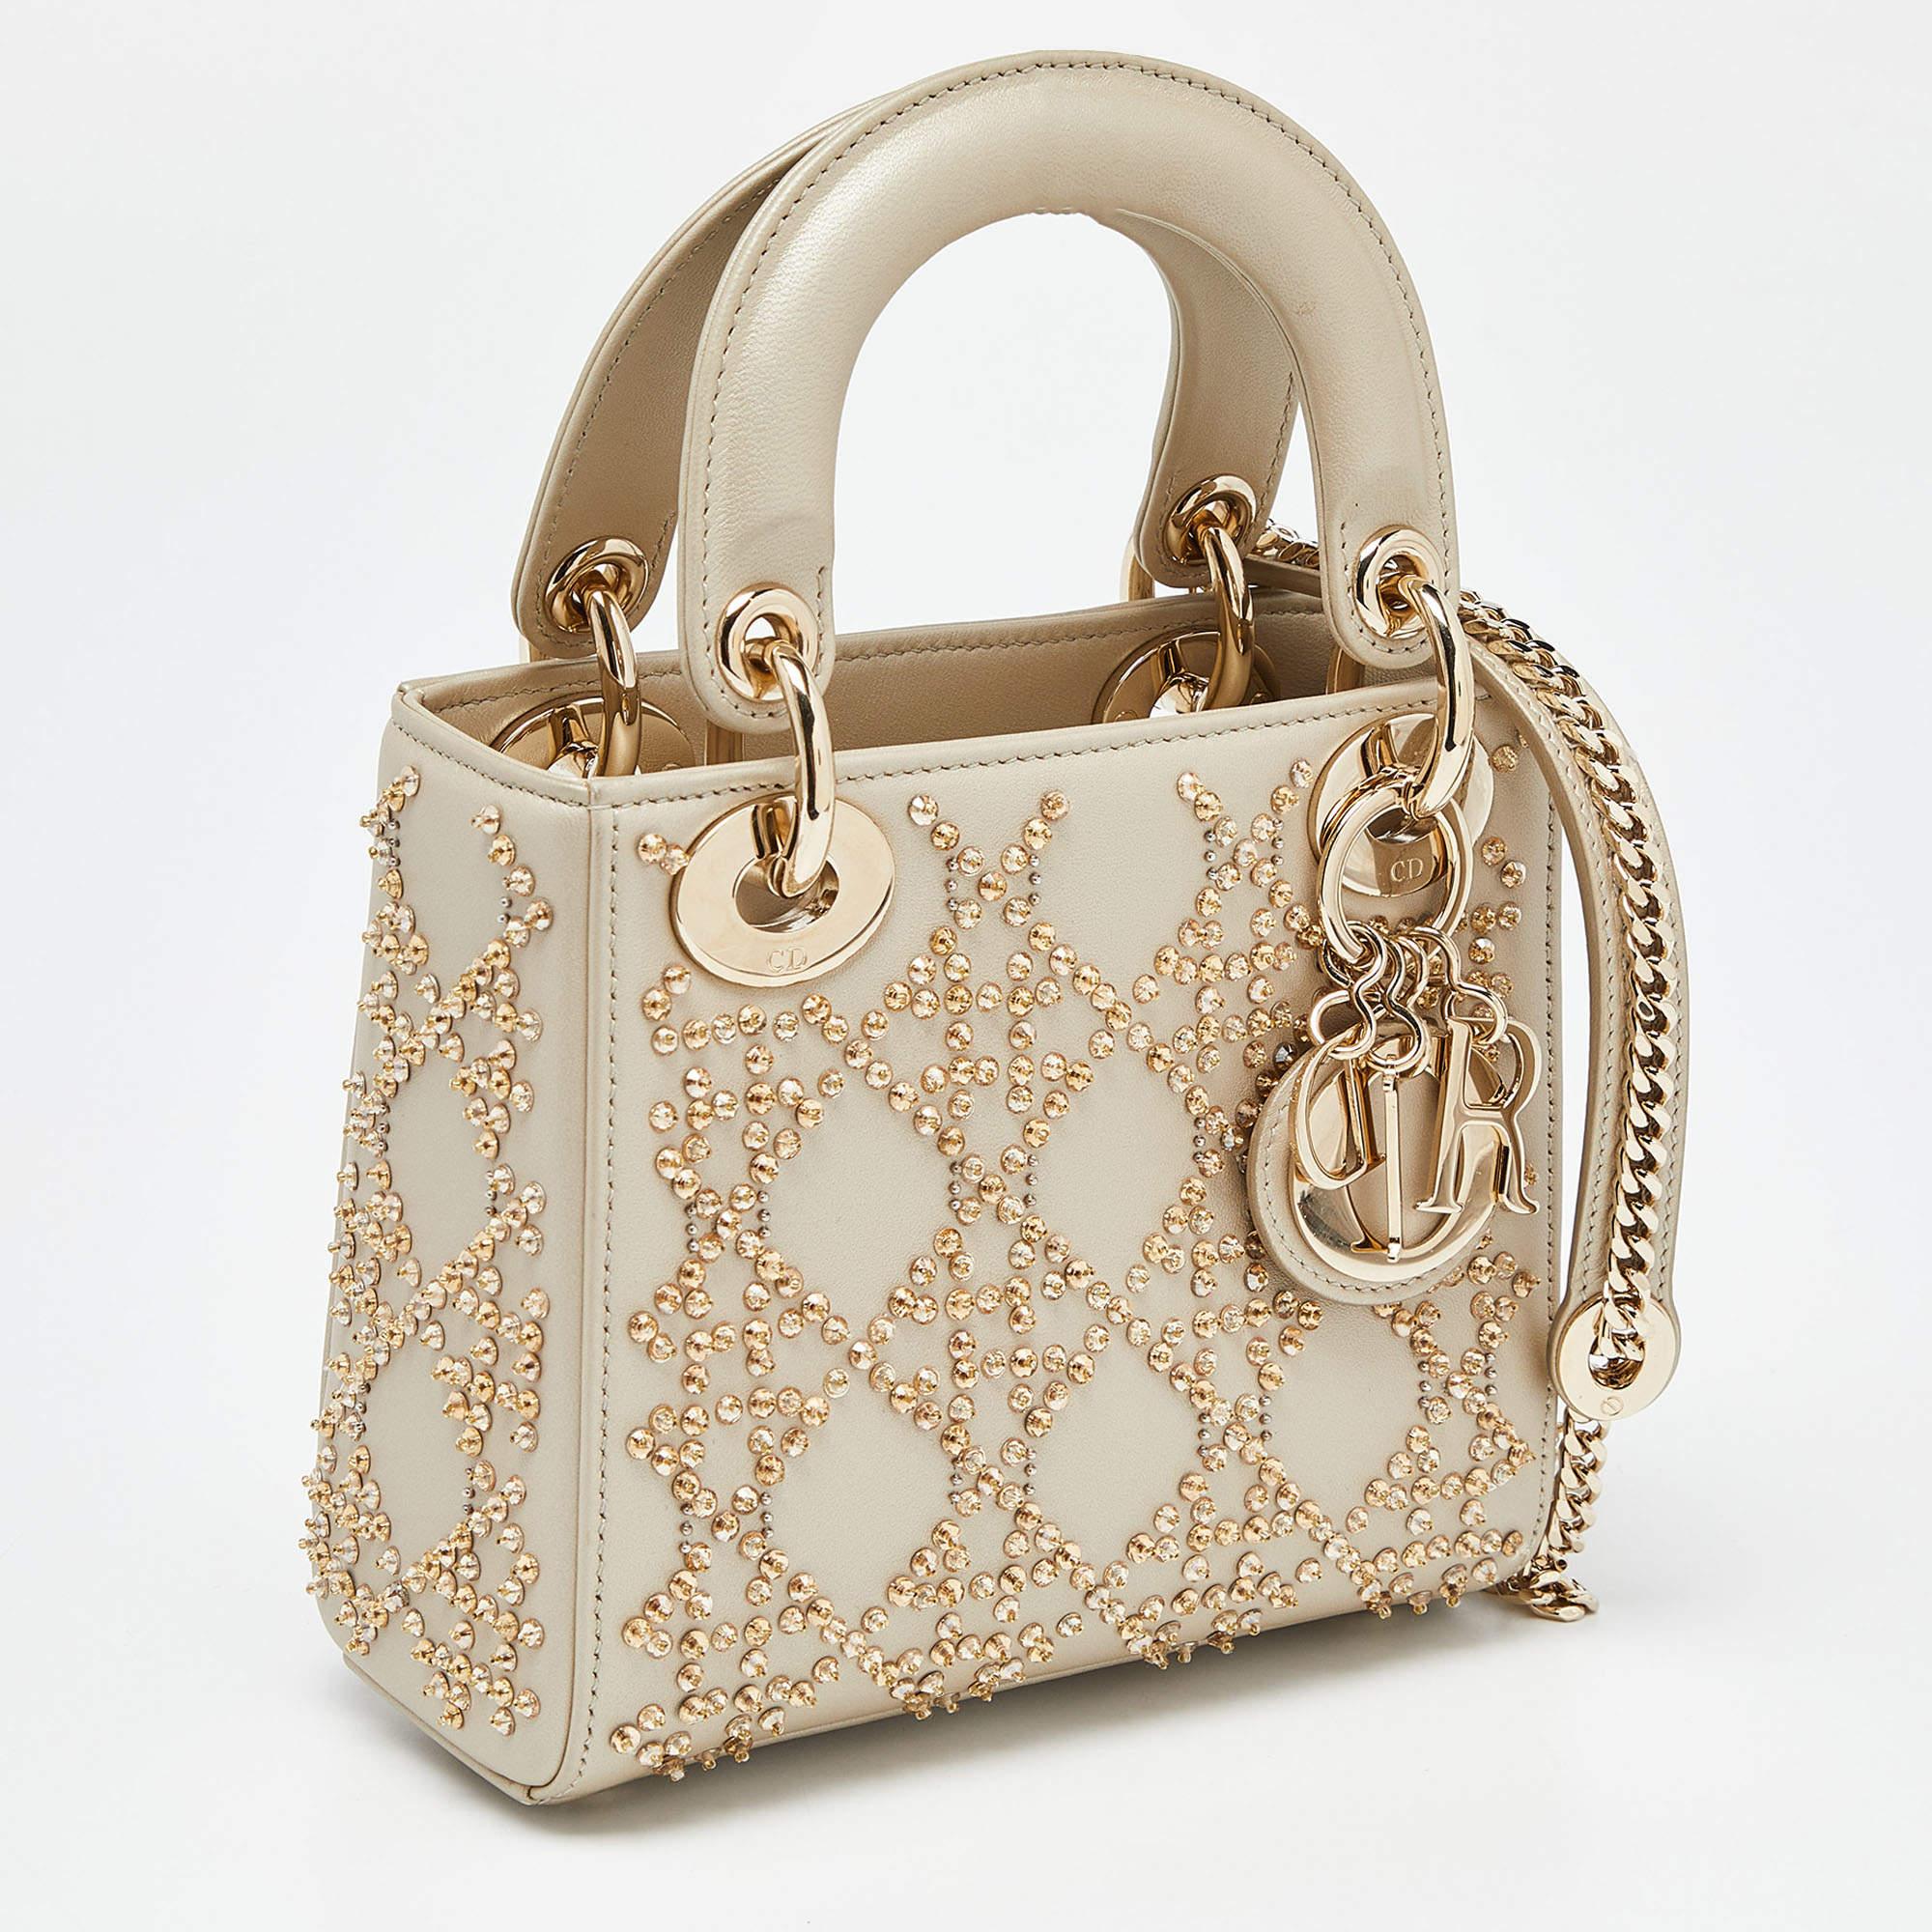 The Lady Dior tote is a Dior creation that has gained recognition worldwide and is today a coveted bag that every fashionista craves to possess. This white-hued tote has been crafted from leather and it carries beaded embellishments. It is equipped